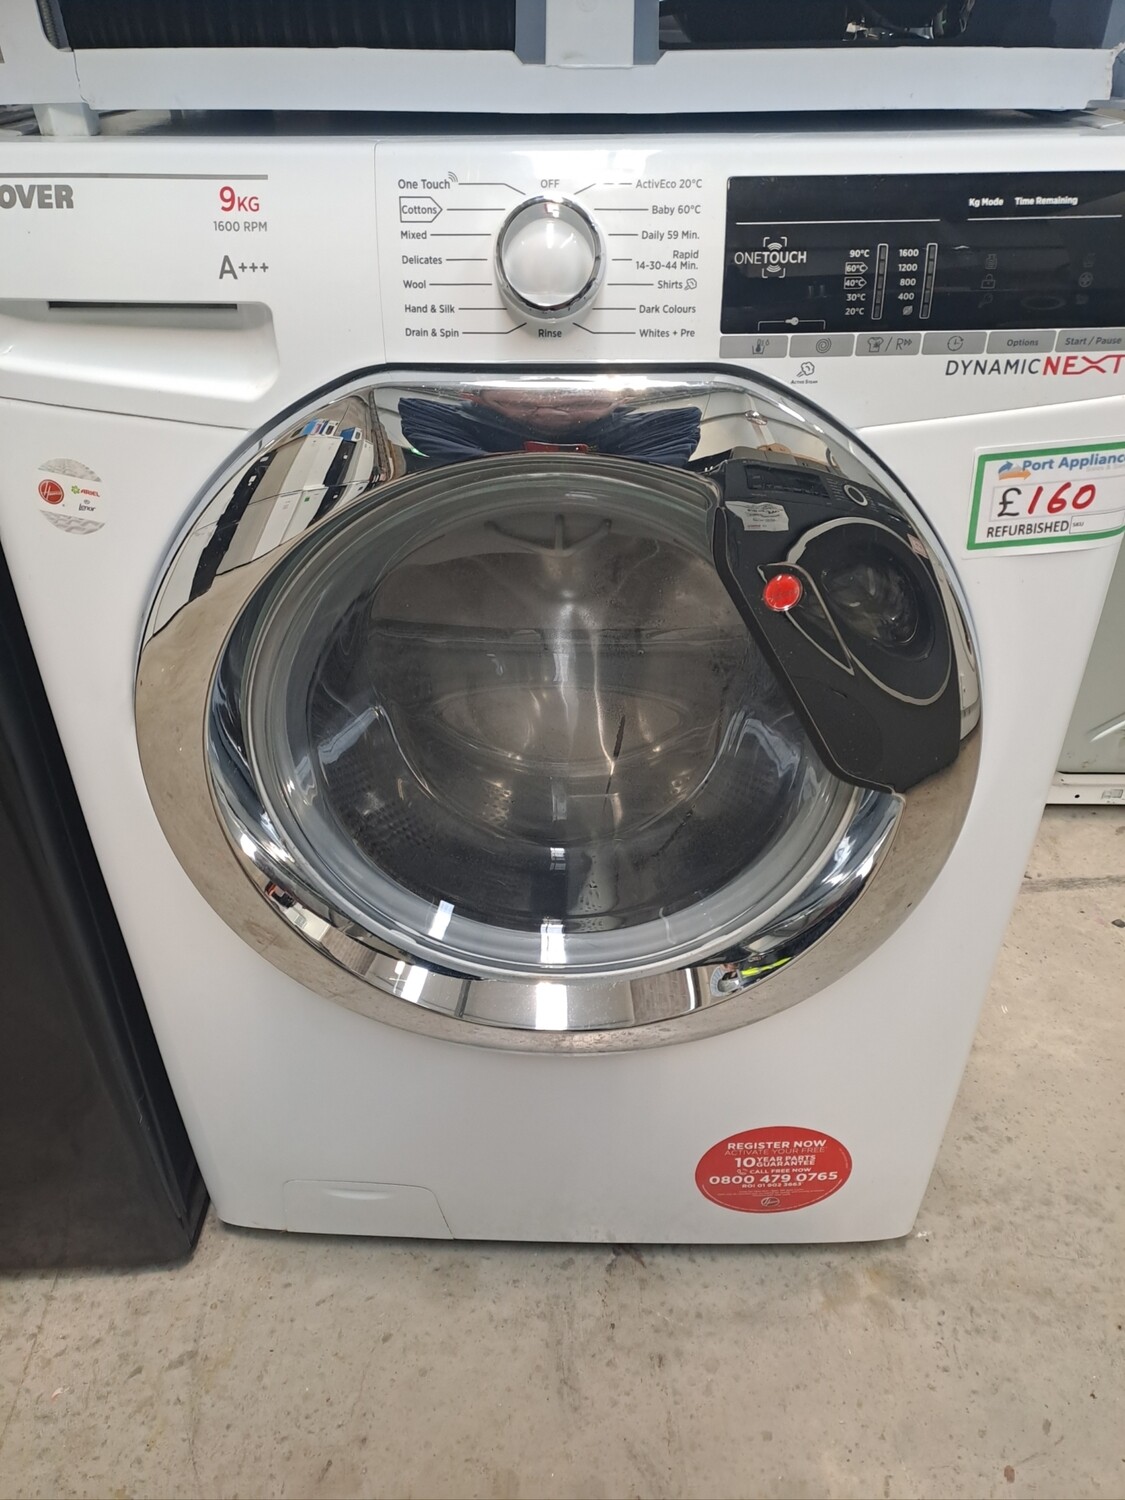 Hoover A+++ 9kg Load 1600 Spin Washing Machine - White - Refurbished - 6 Month Guarantee